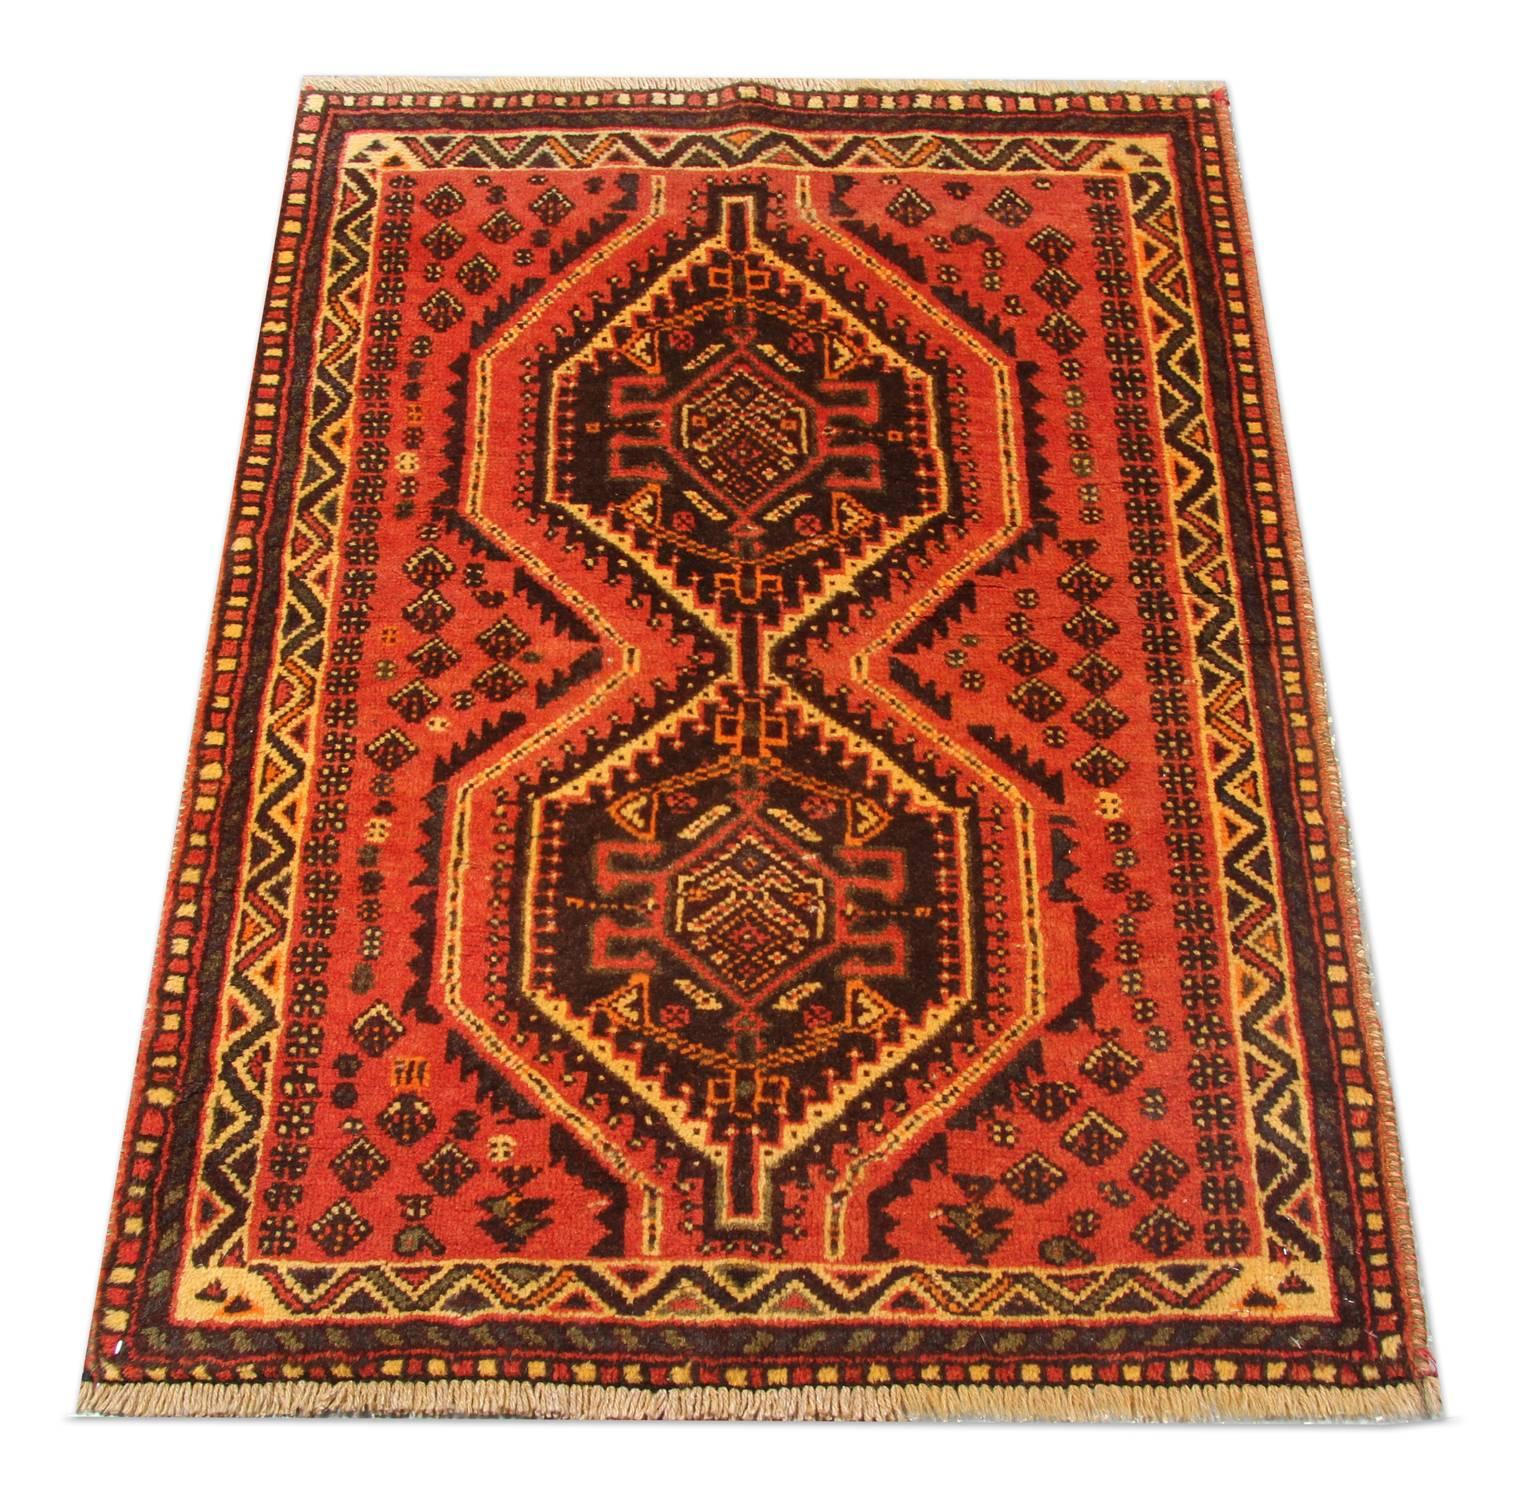 This tribal area rug has been woven by hand in Turkey and features a fantastic tribal design. Two medallions decorate the central design woven in brown, blue, orange and cream accent colours on a rich red background. This is then enclosed by a